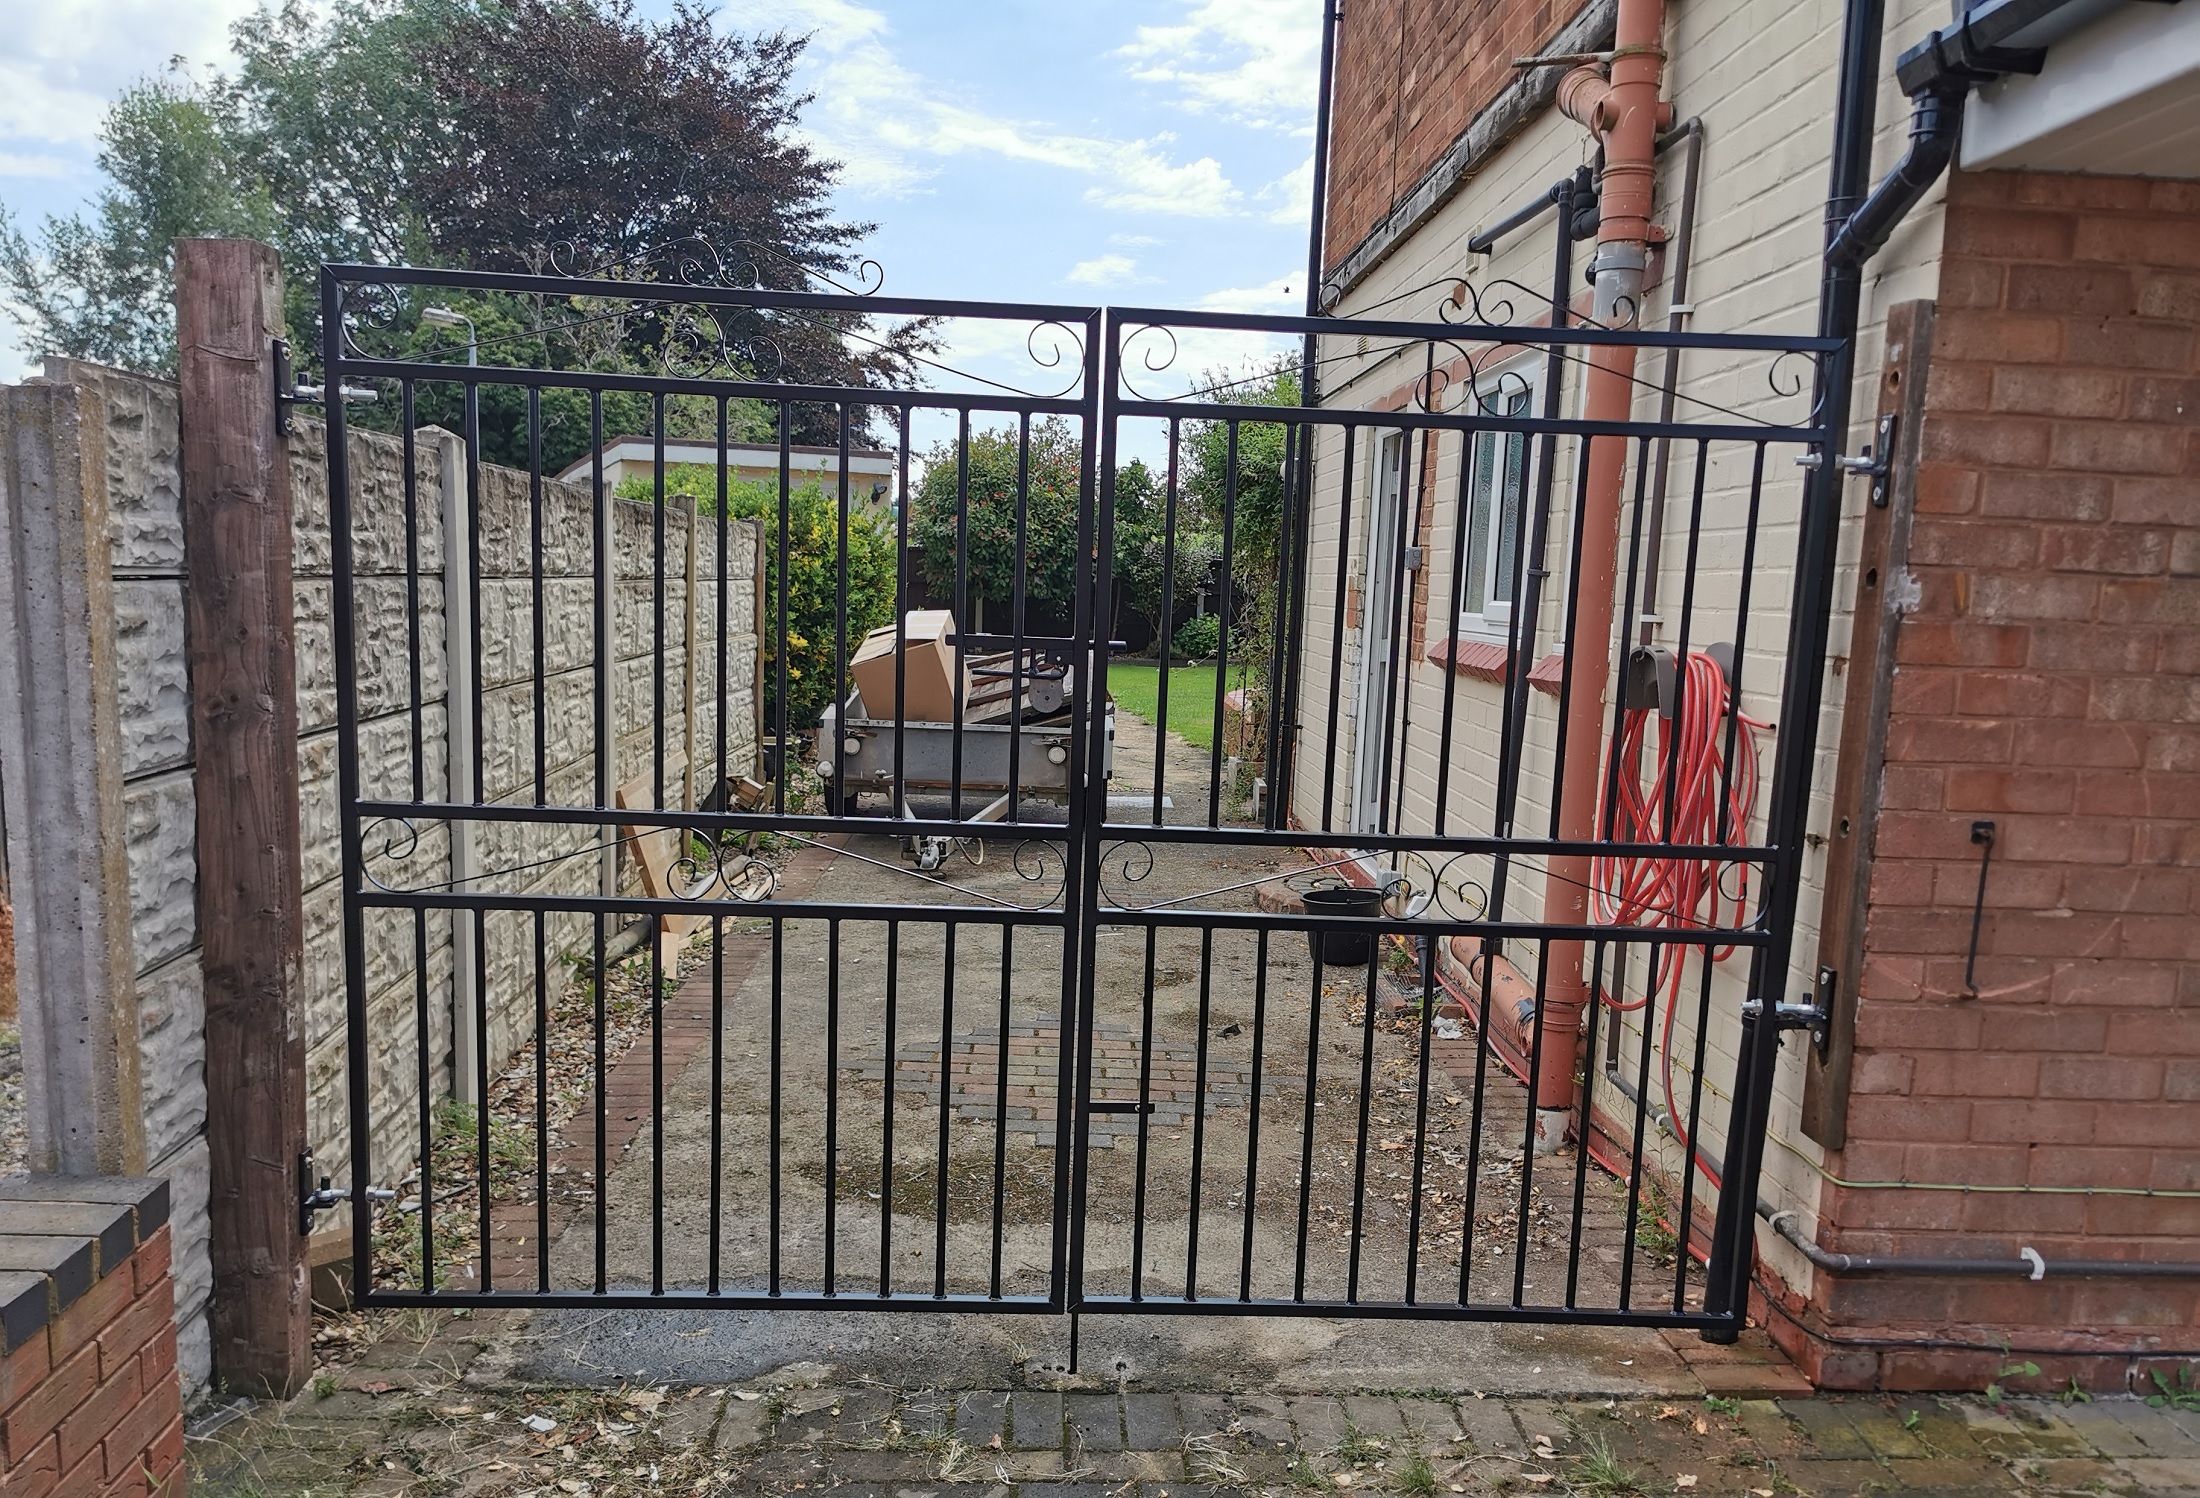 Marlborough wrought iron style estate gates fitted to wooden posts